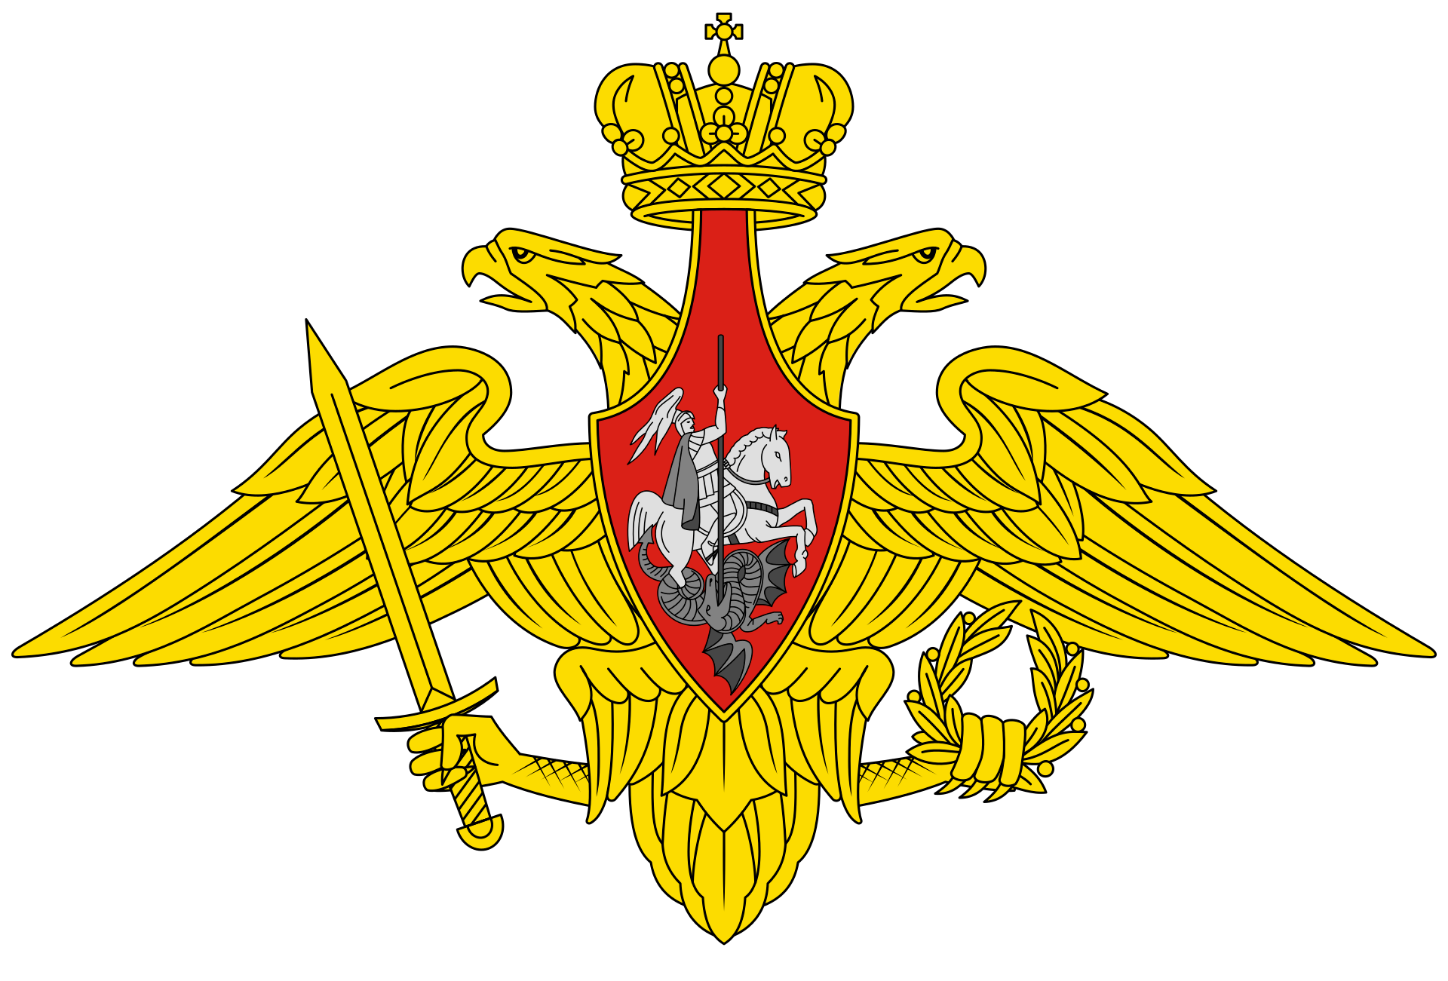 Middle_emblem_of_the_Armed_Forces_of_the_Russian_Federation_27.01.1997-present.svg.png